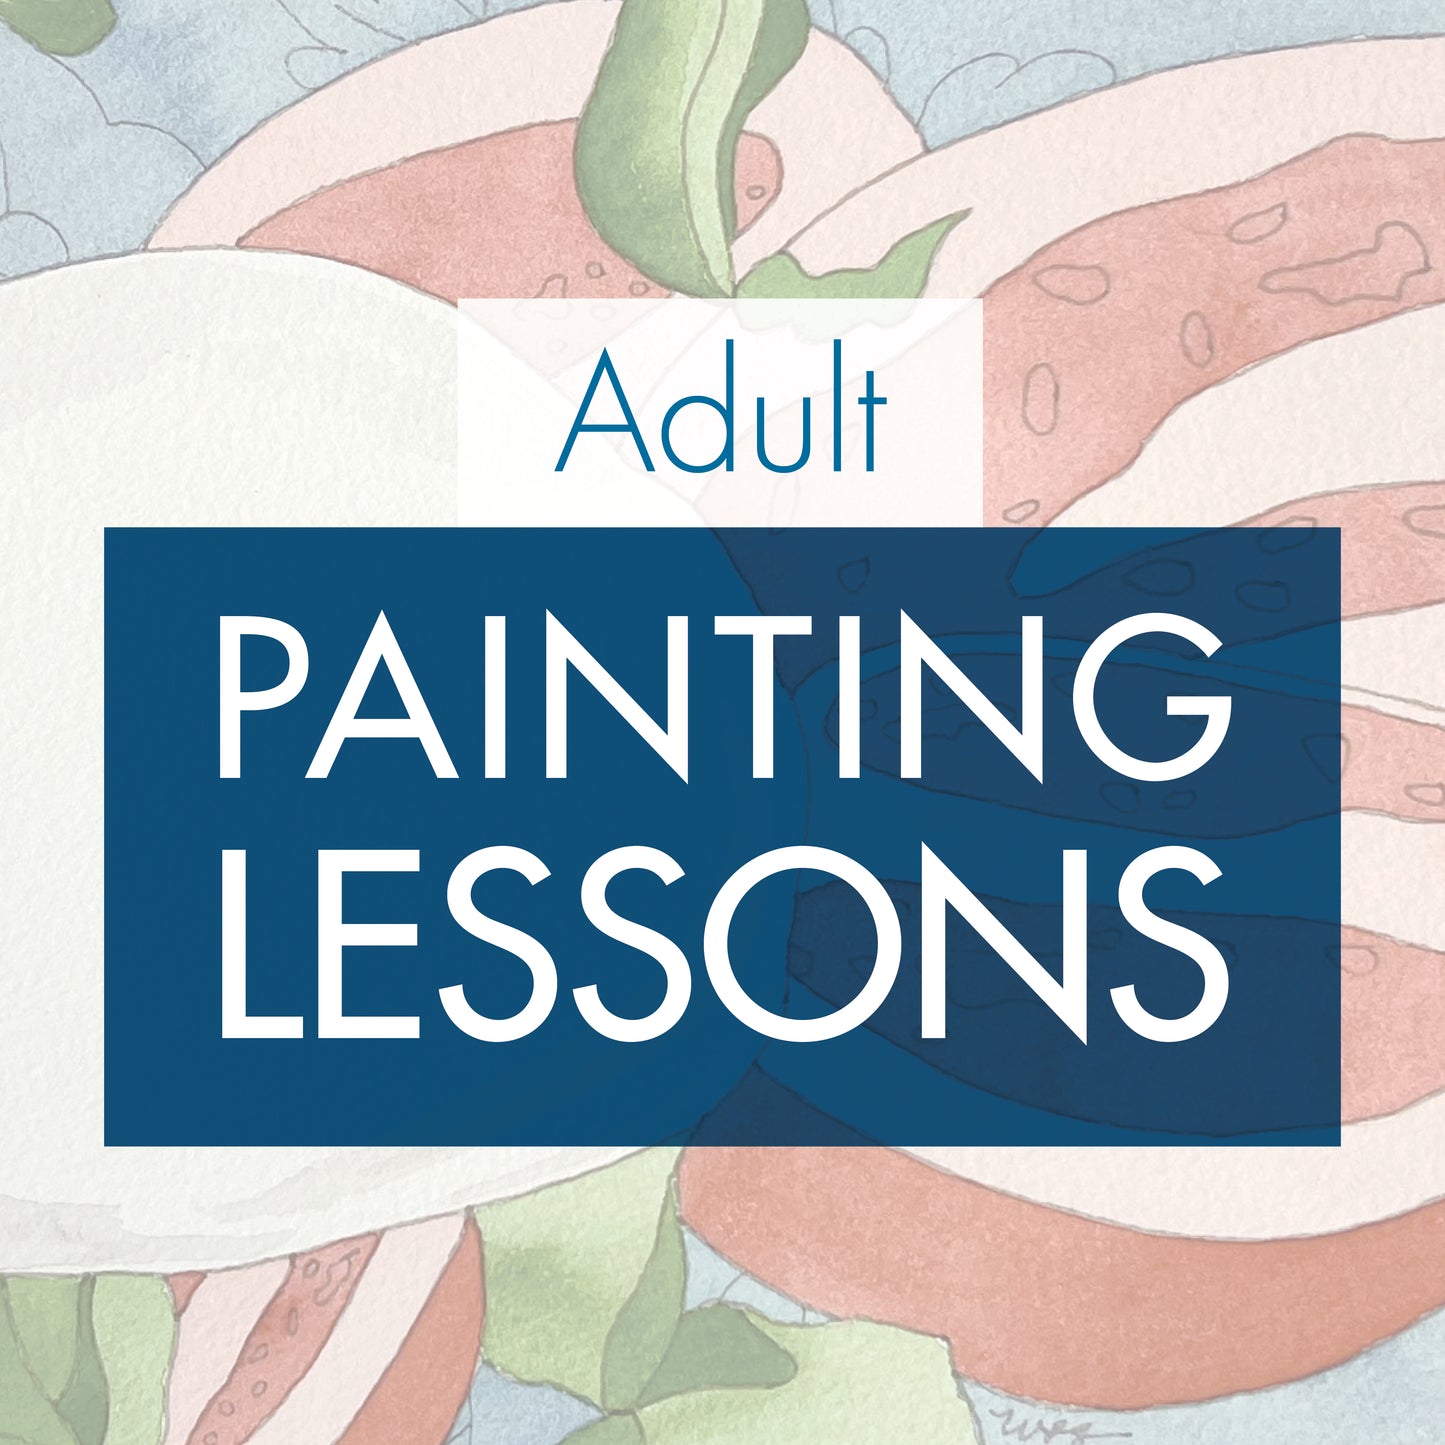 Adult / Painting Lessons